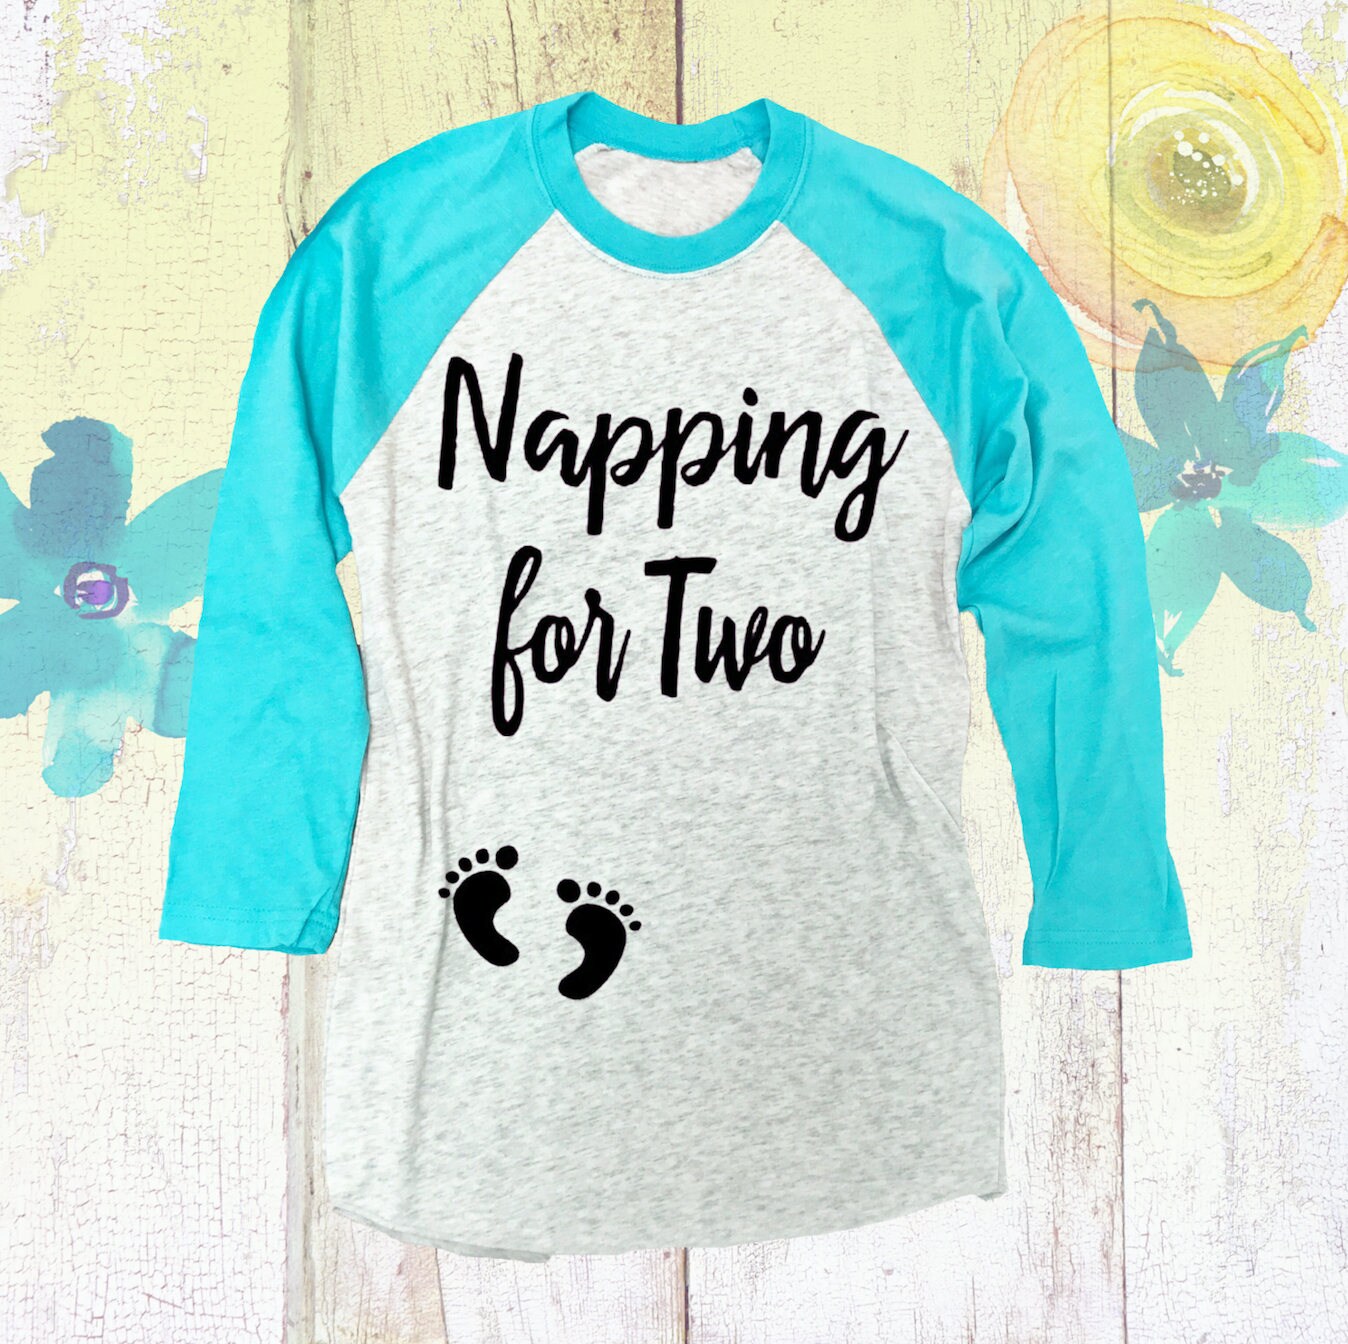 Napping For Two® Pregnancy Baseball Shirt. XS-3XL available. Many Colors. Pregnancy Announcement Shirt. Pregnancy Baseball Shirt.